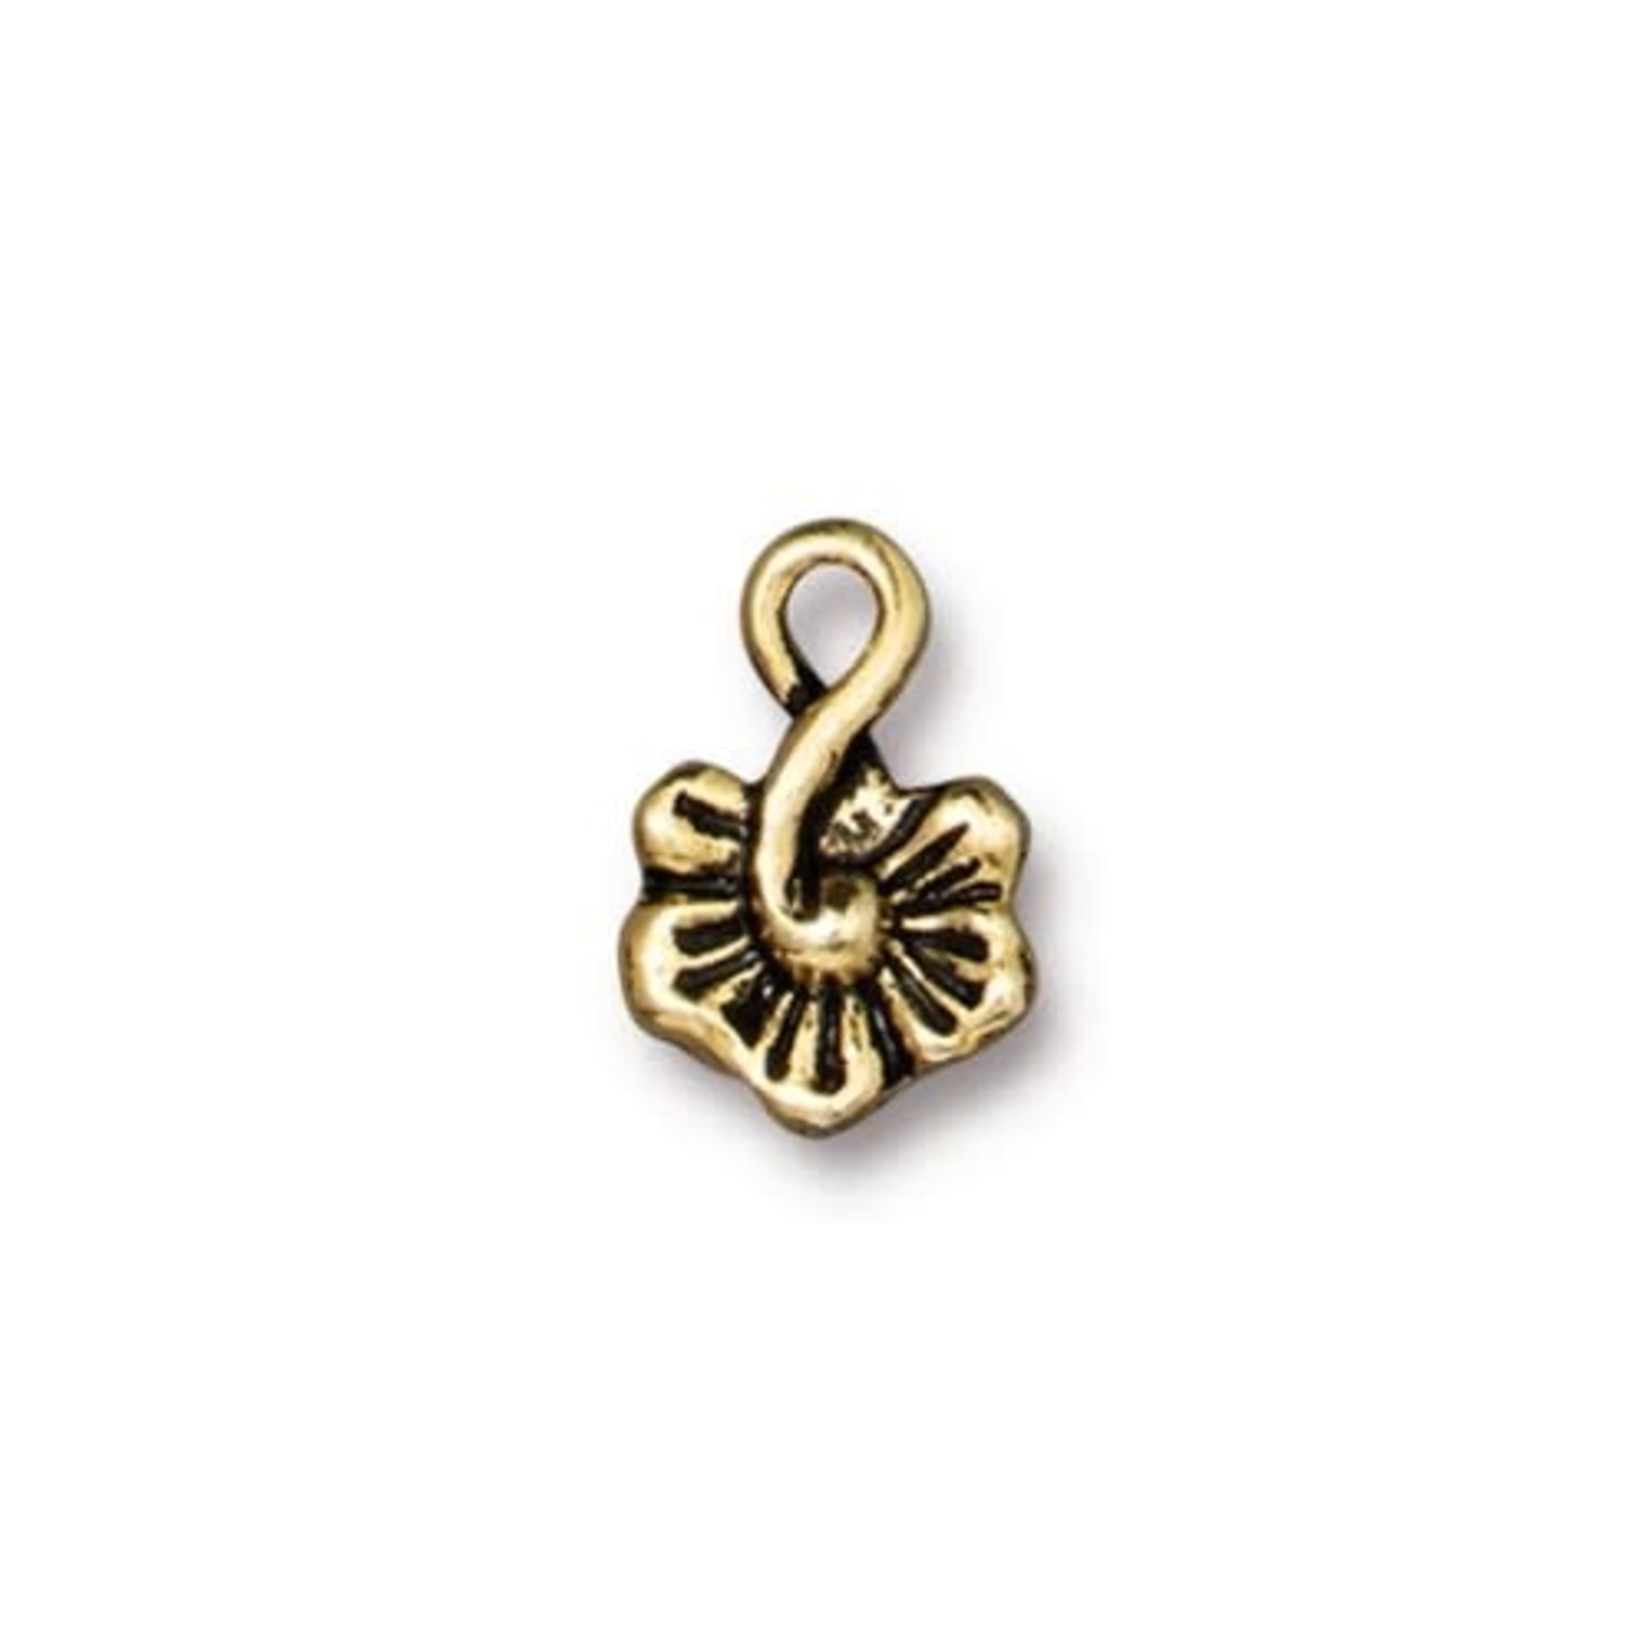 TierraCast Tierracast Antique Gold Plated Small Blossom Charm